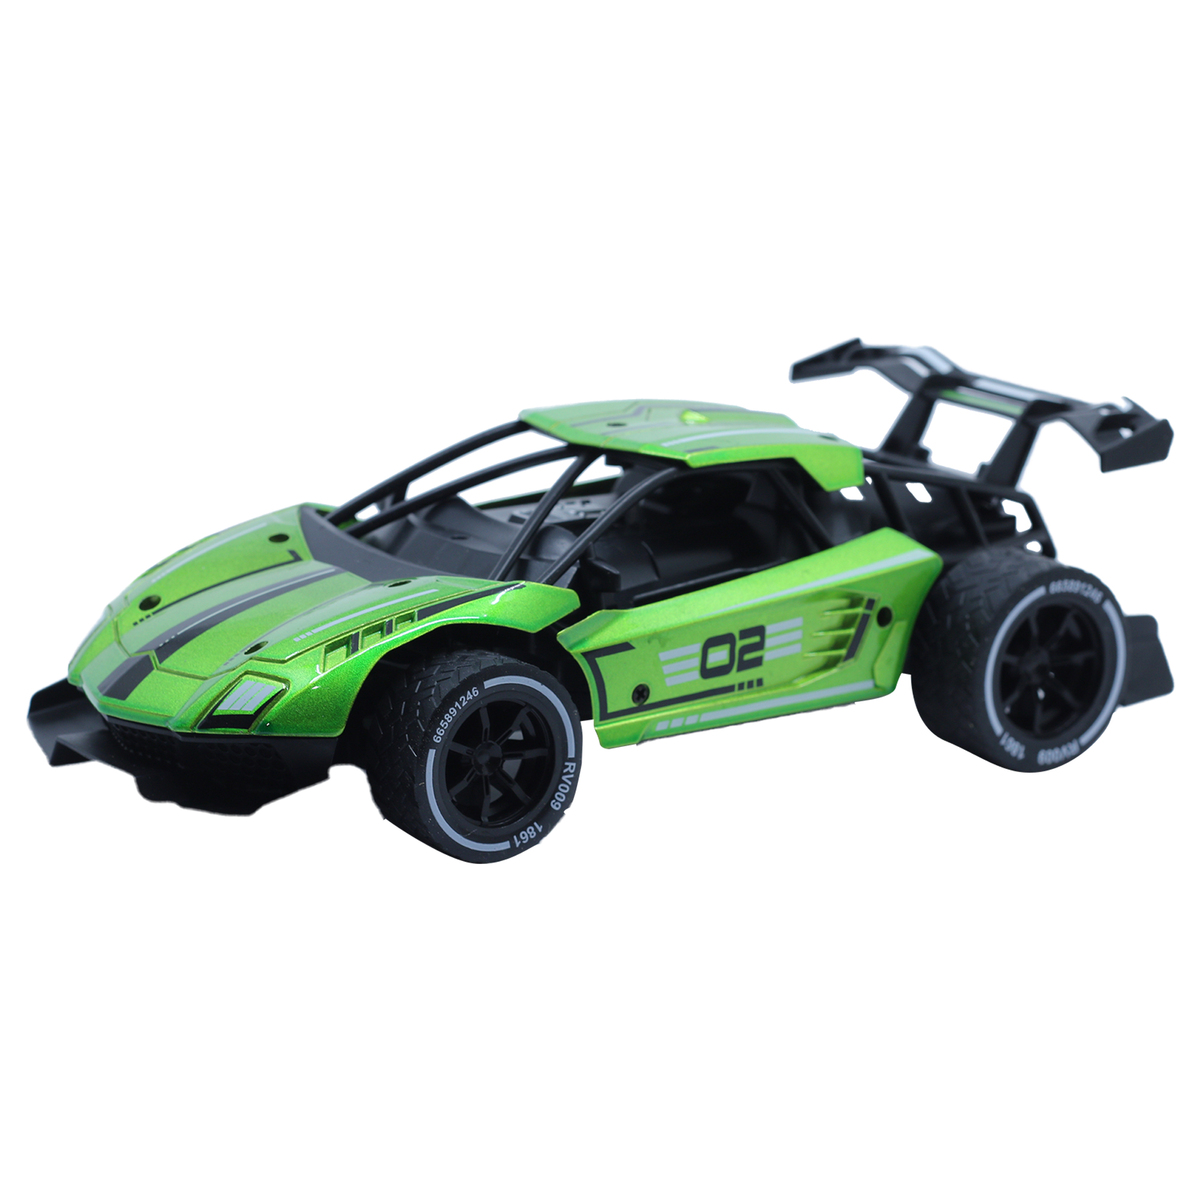 Skid Fusion Rechargeable Remote Control Car 8002